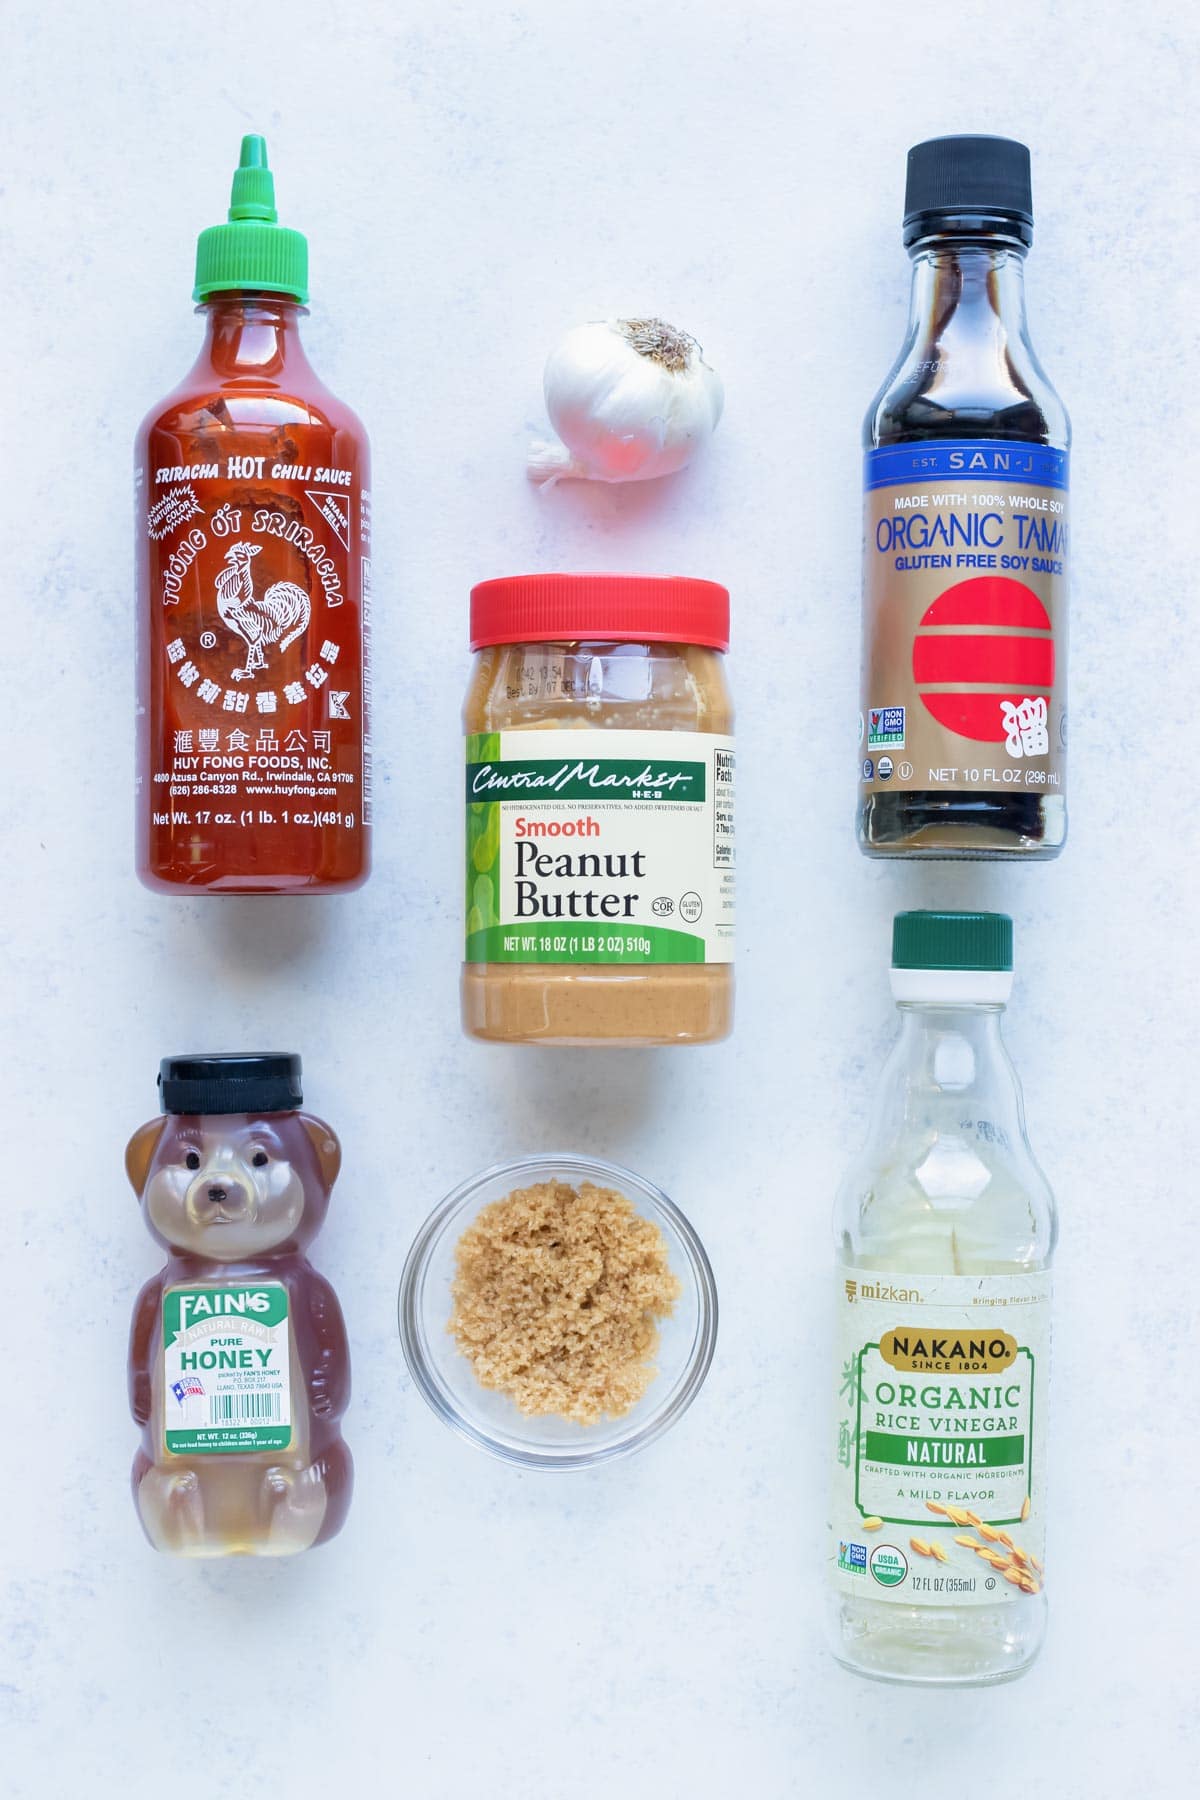 Sriracha, soy sauce, peanut butter, honey, rice vinegar, garlic, and sugar are the combinations in this sauce recipe.